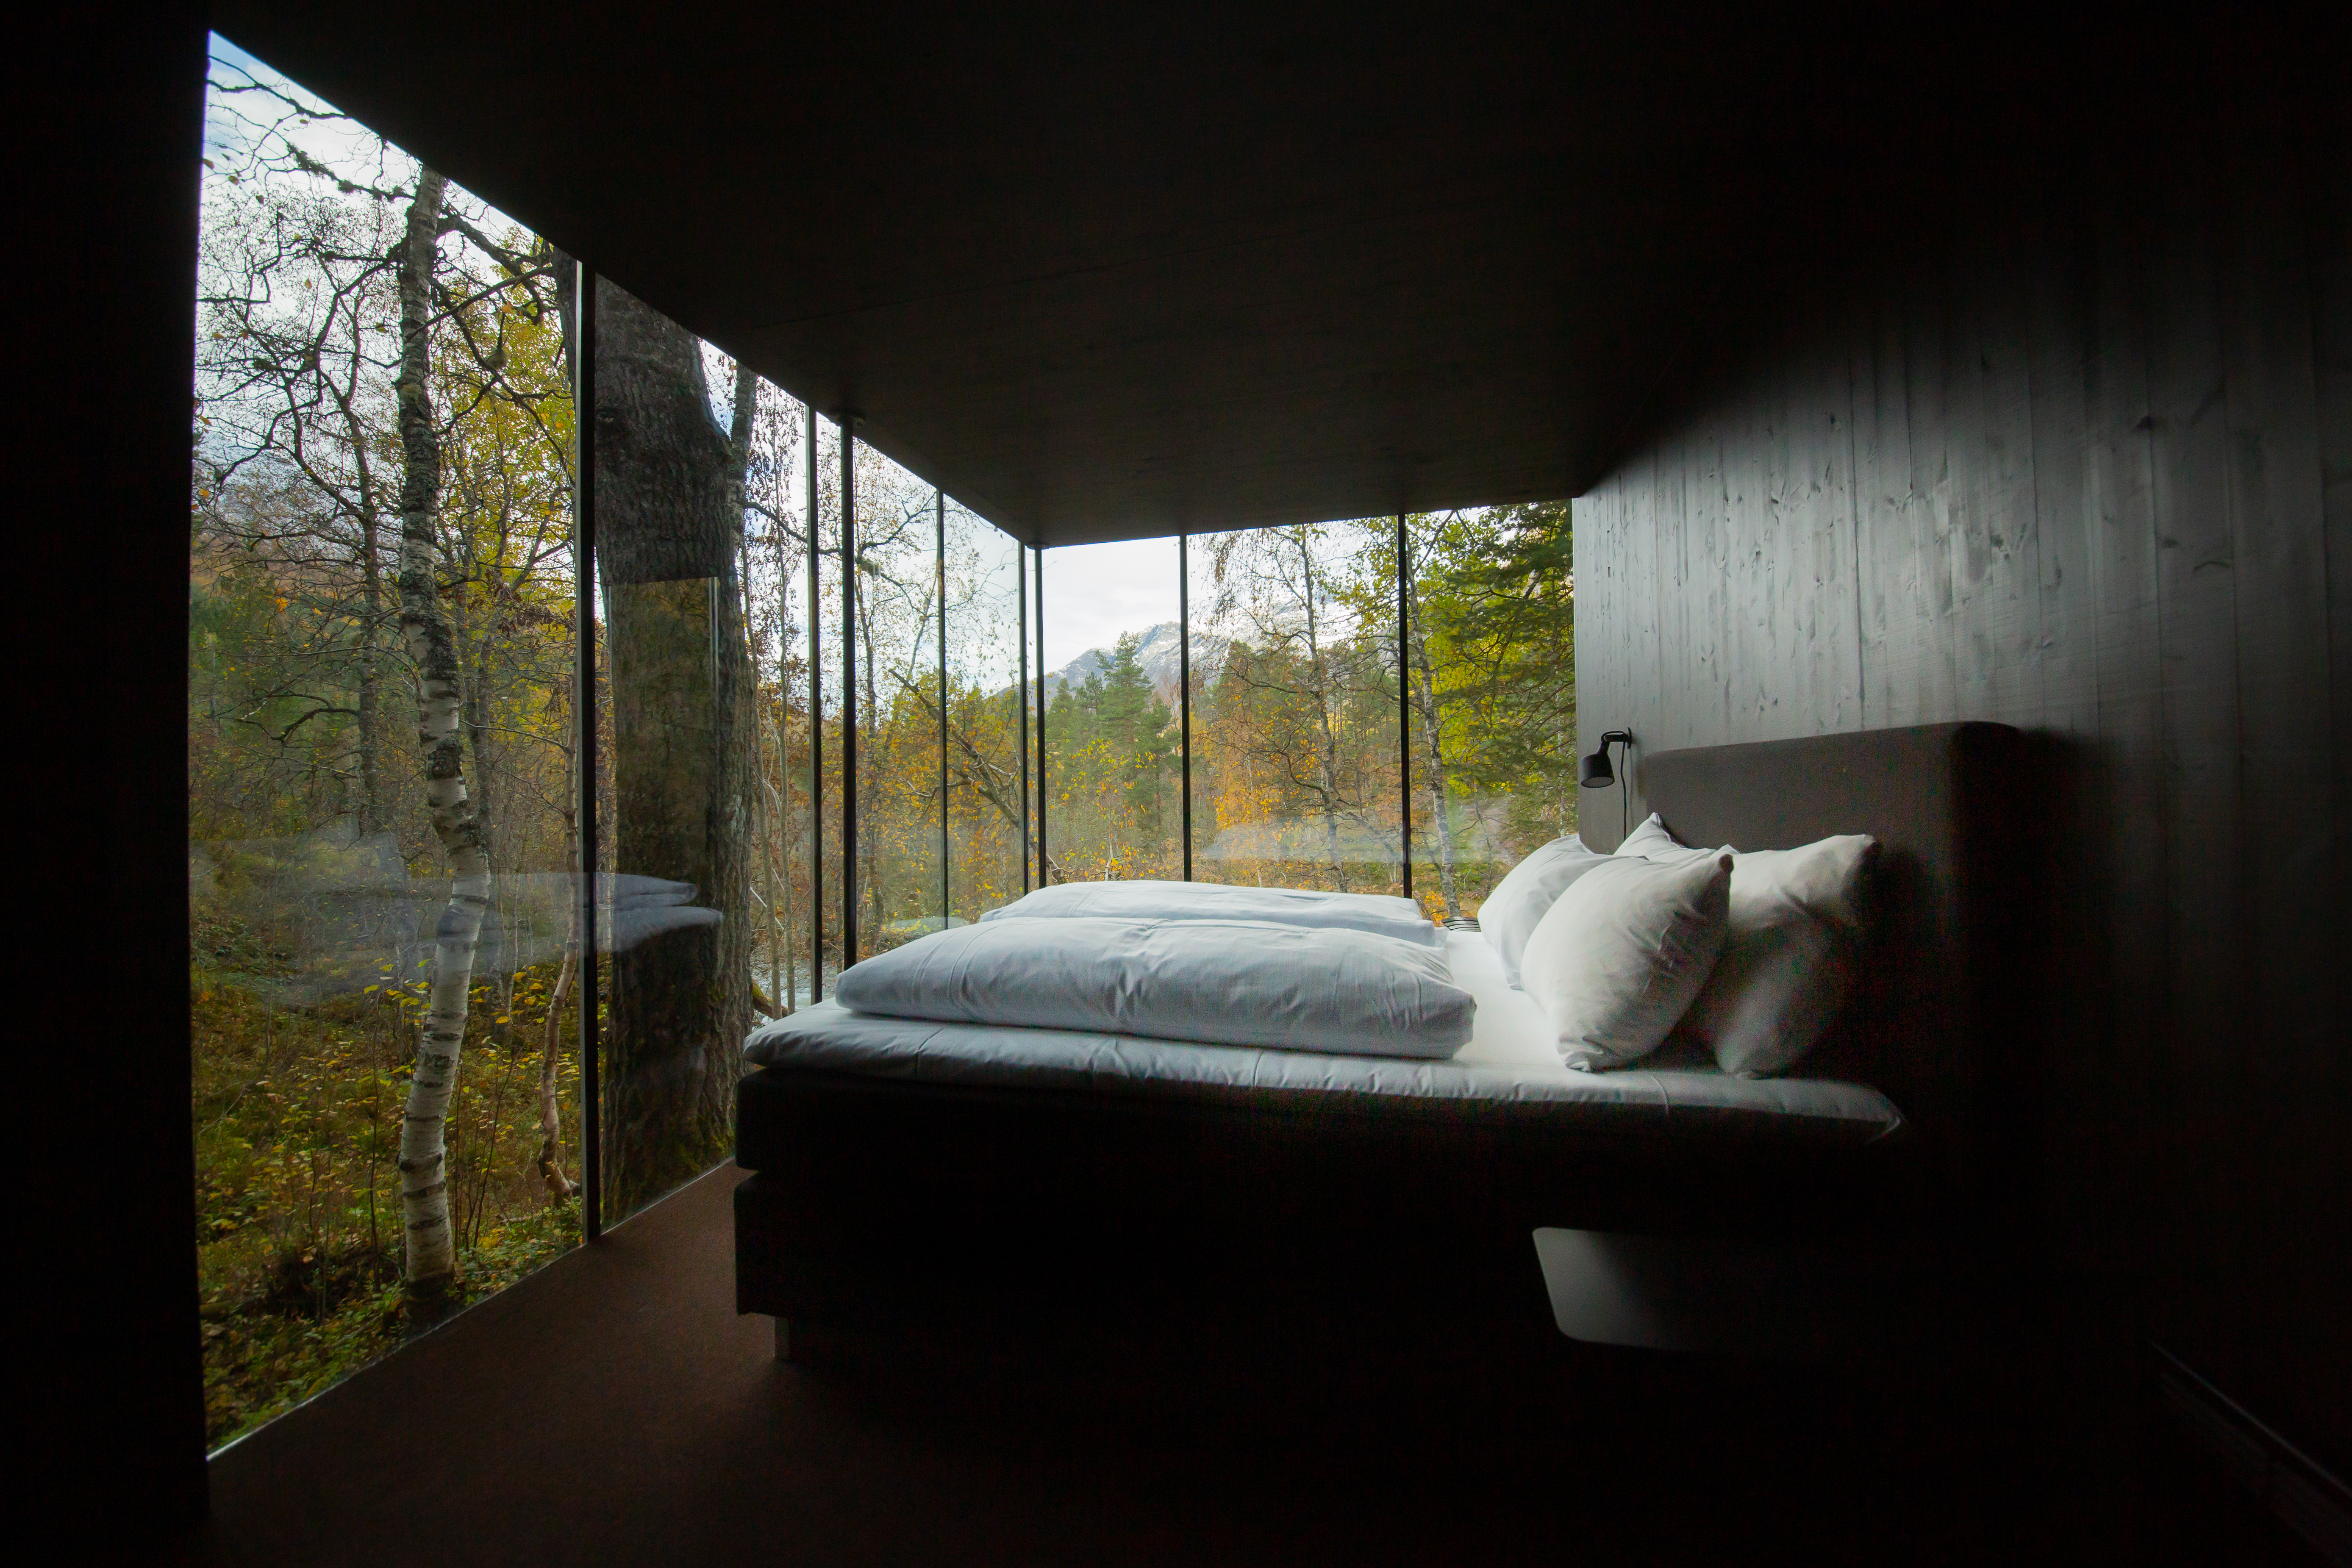 A bed in one of the rooms of Juvet Landscape Hotel